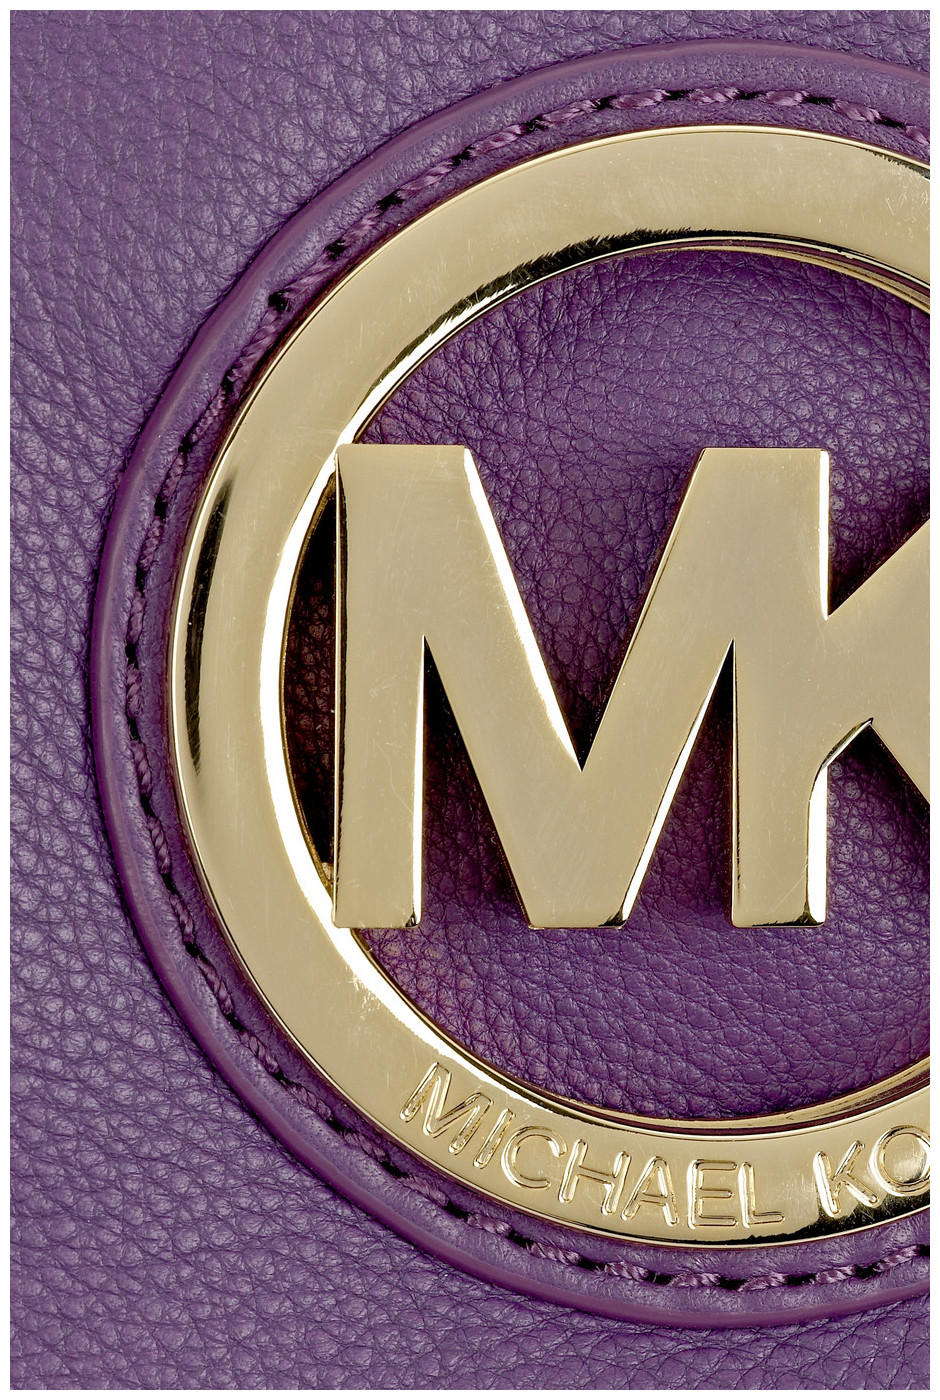 mk name wallpaper,violet,purple,text,lilac,material property (#613447) -  WallpaperUse